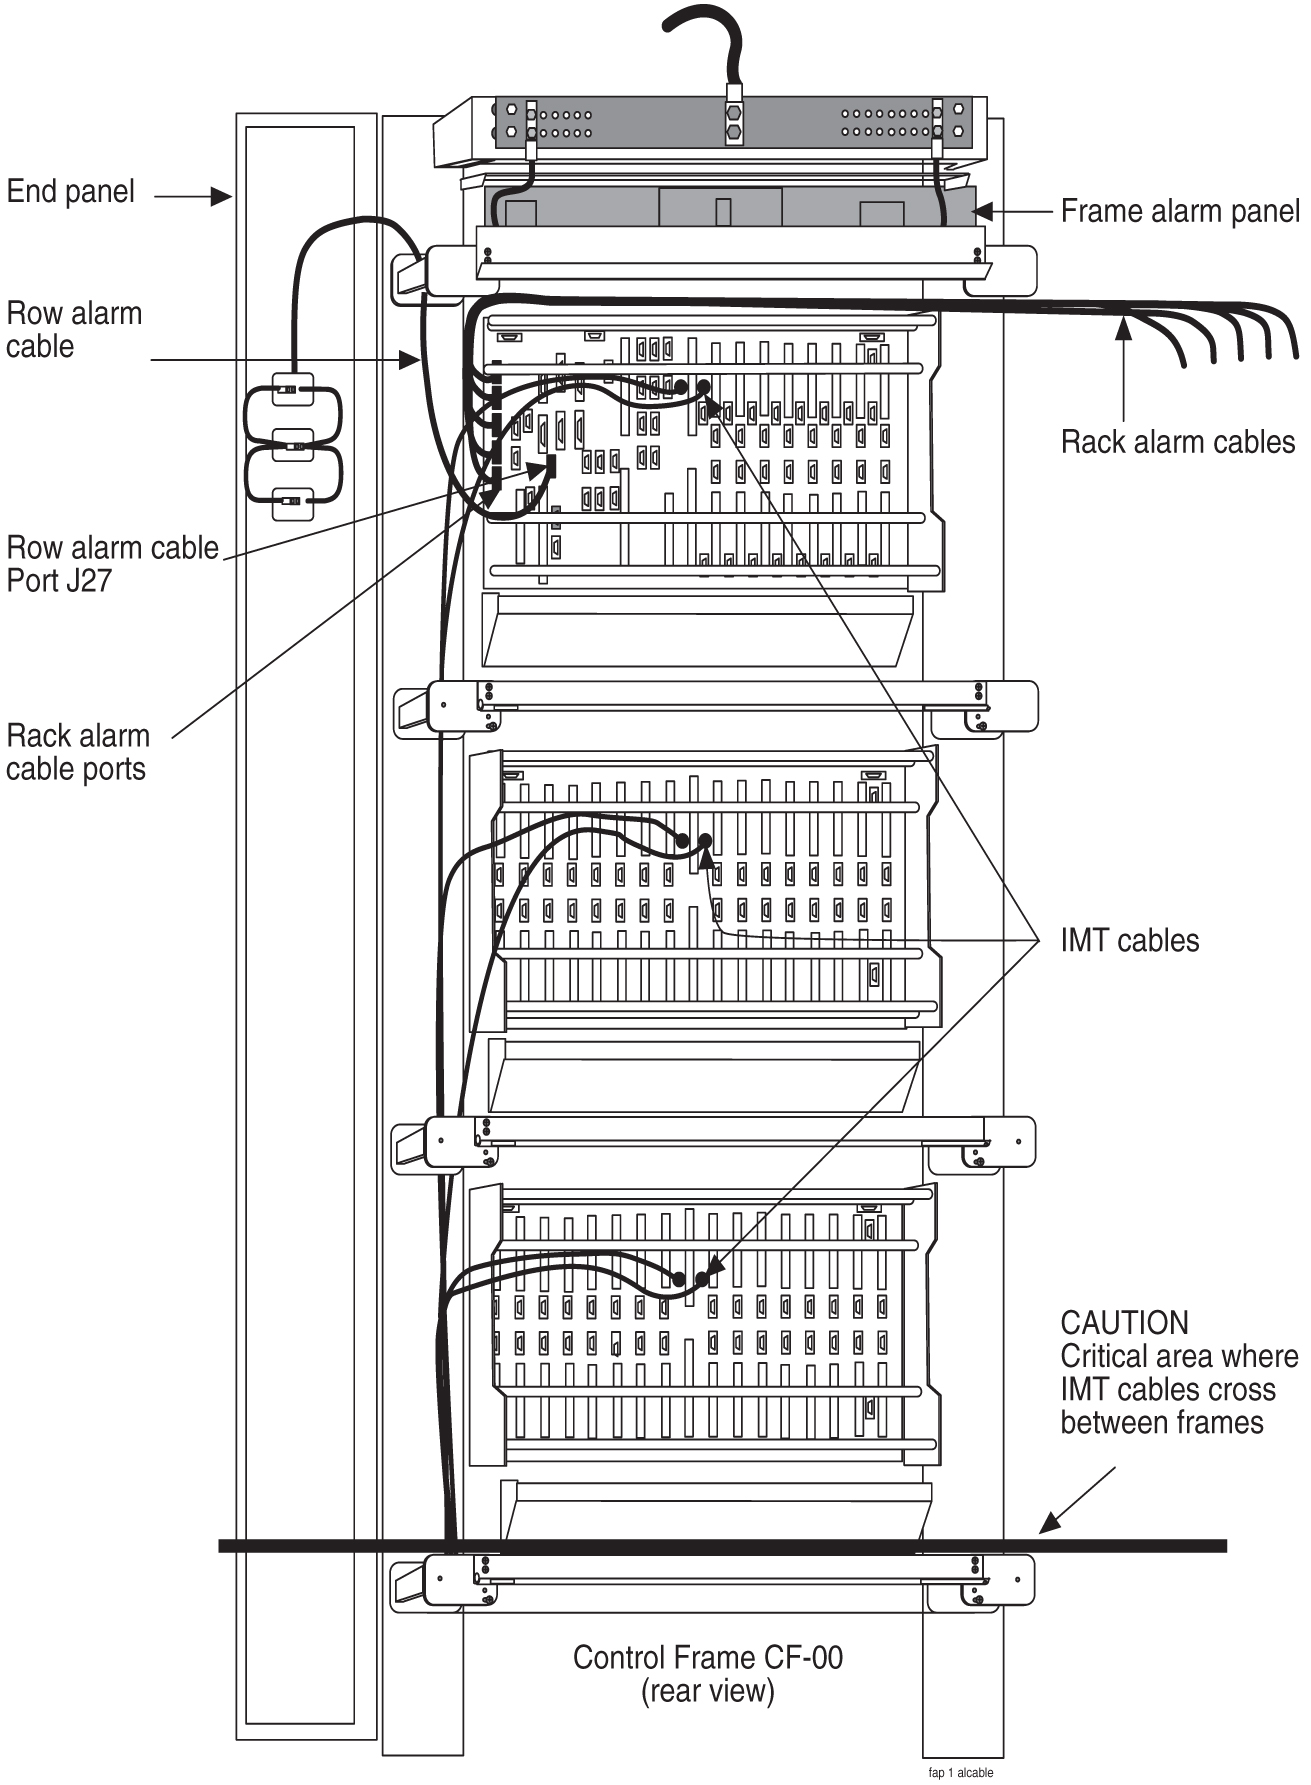 img/c_rack_alarm_and_row_alarm_cable_routing_im-fig1.jpg